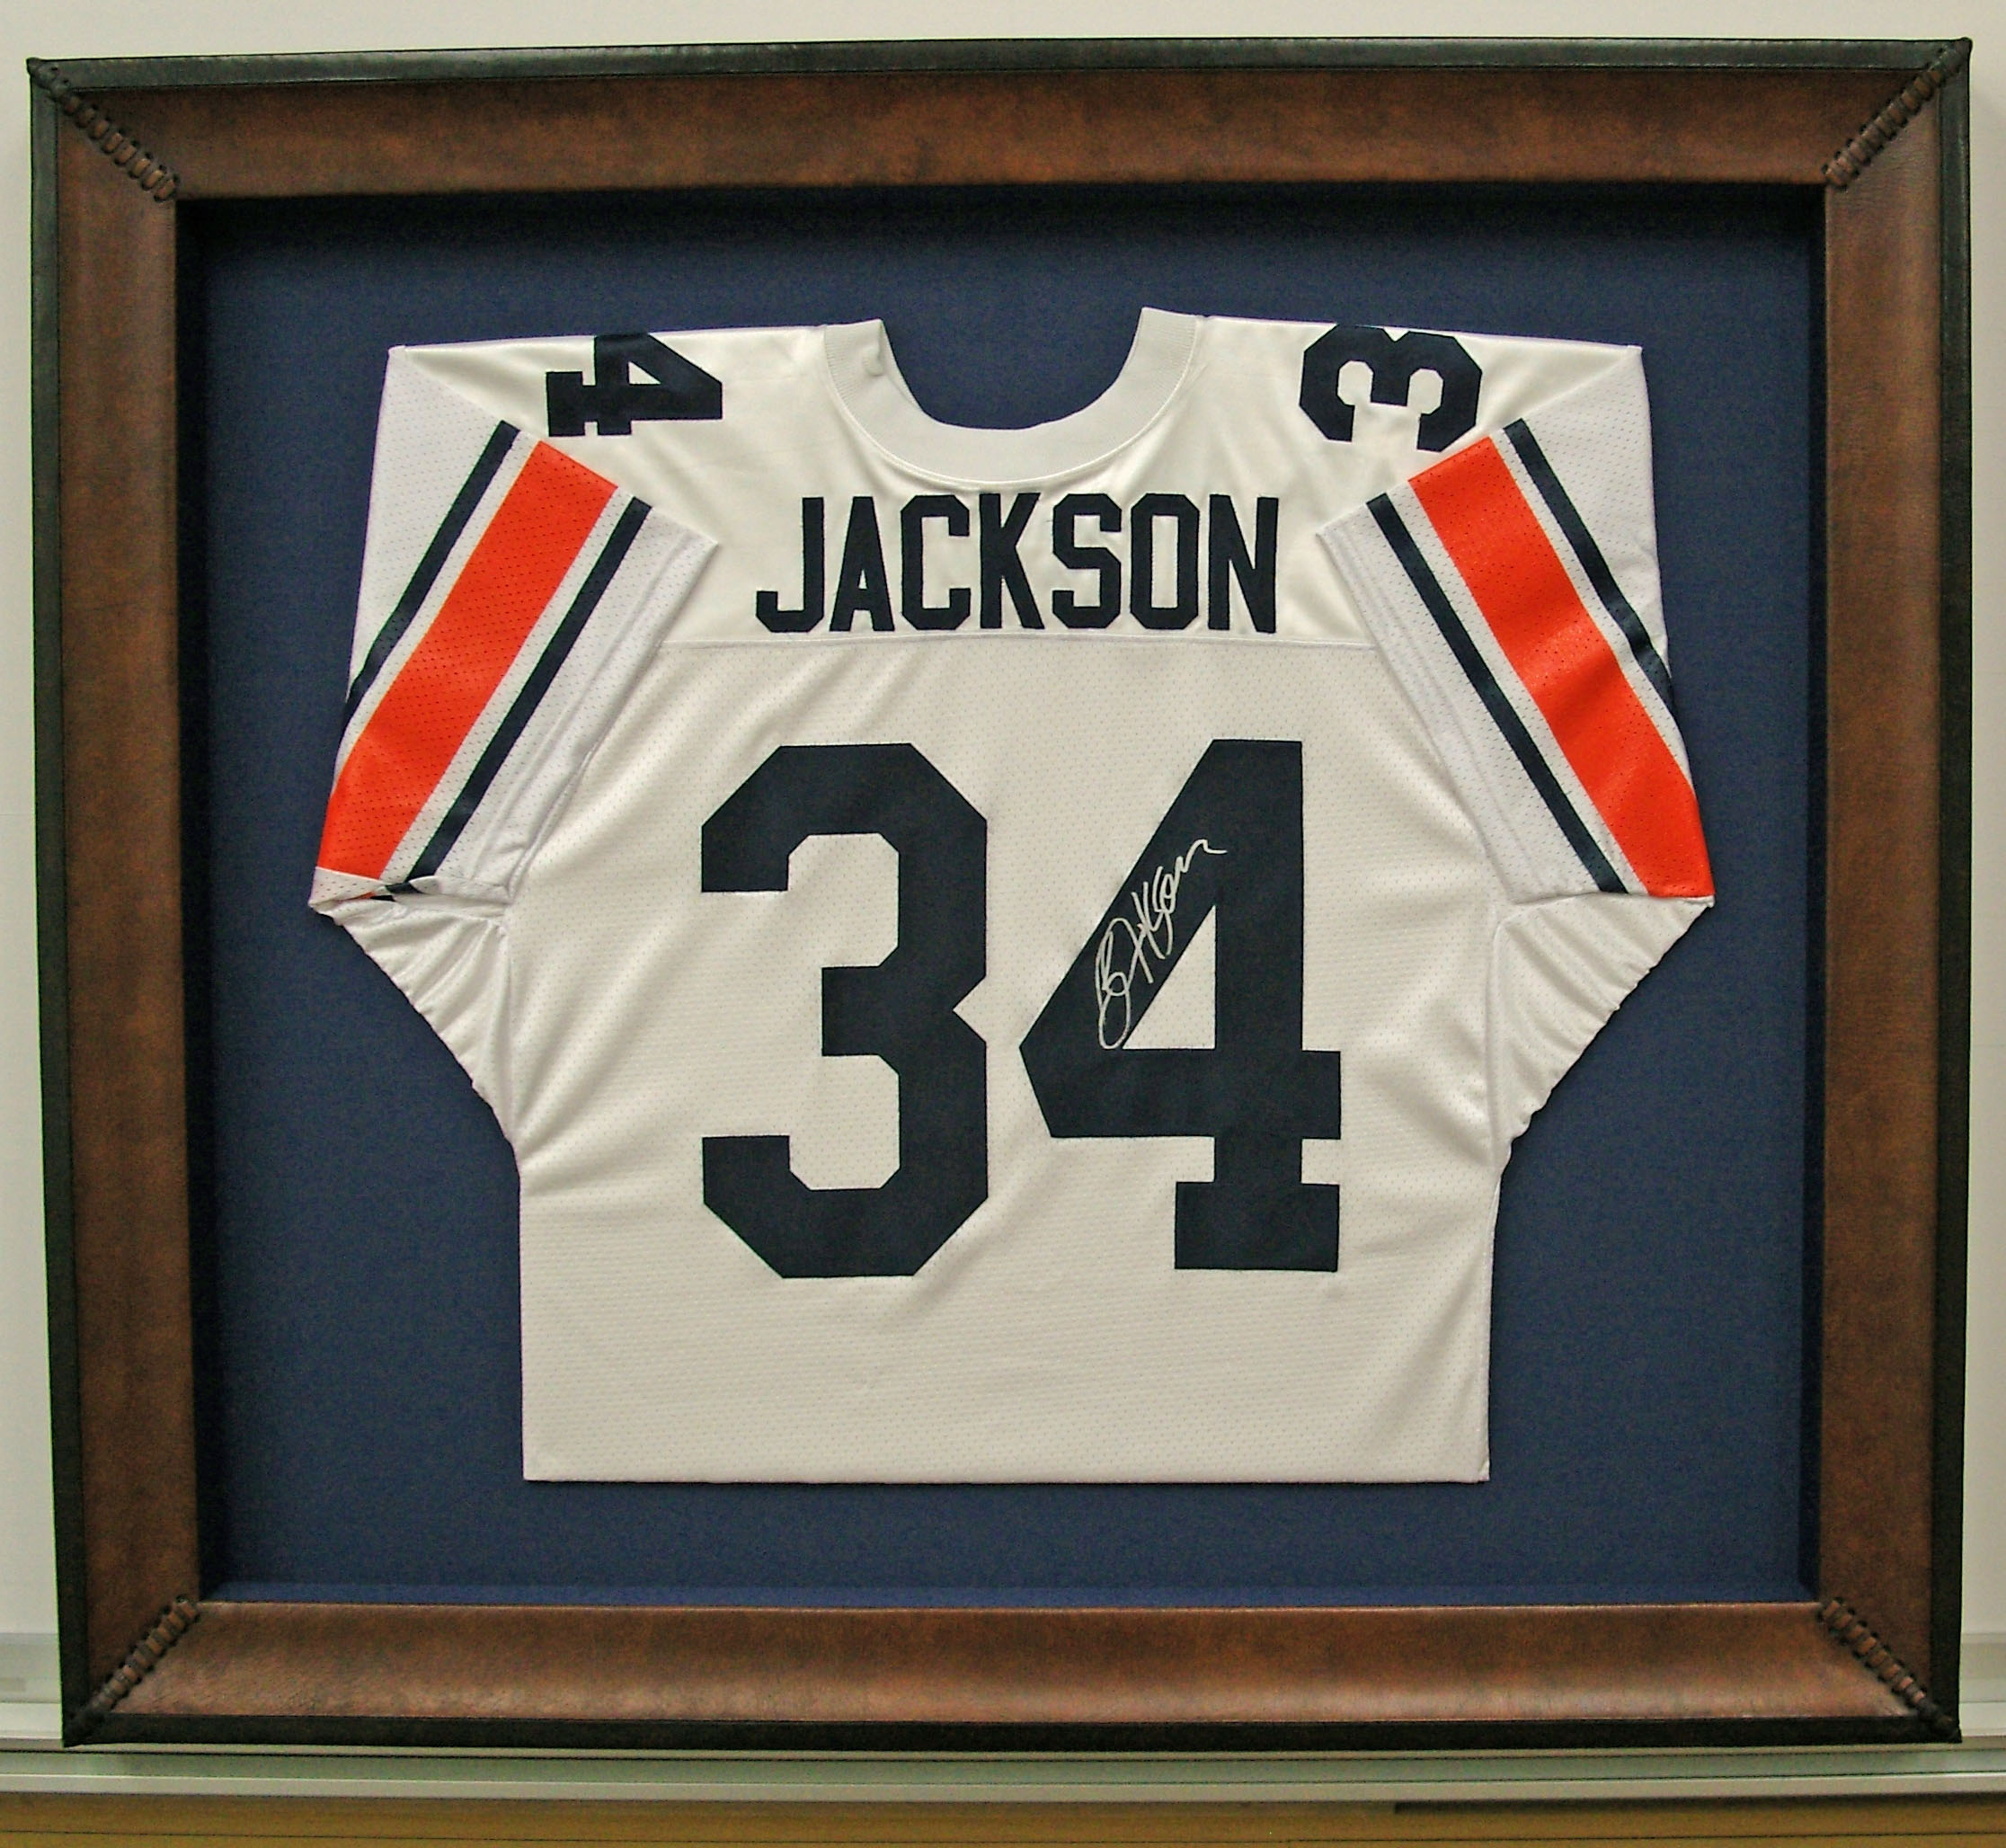 How to Frame a Football Jersey